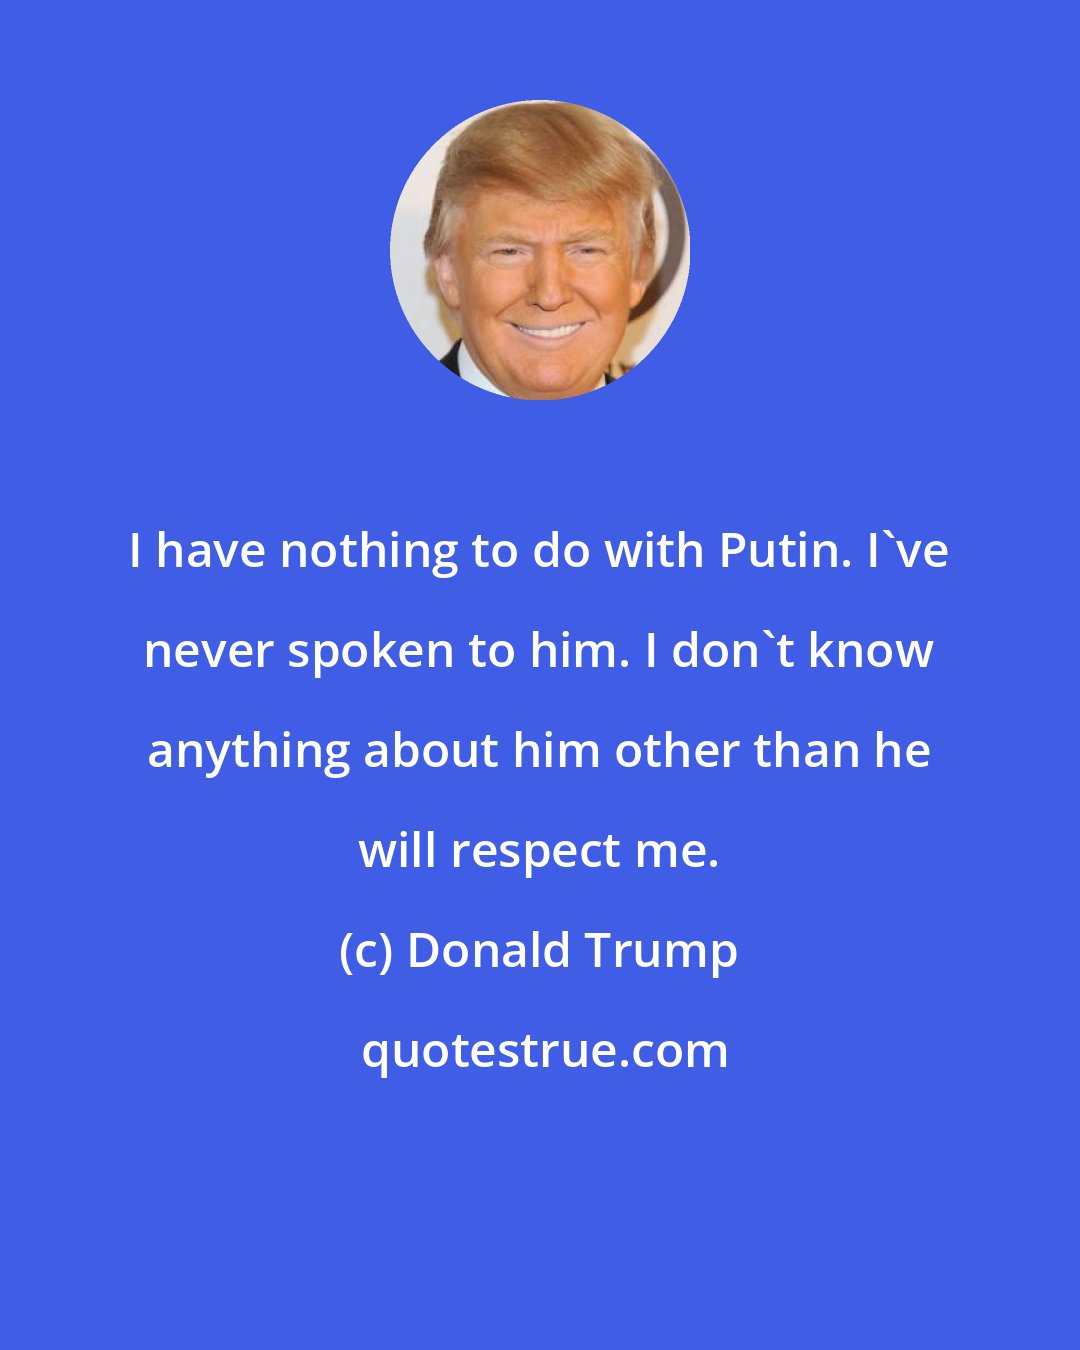 Donald Trump: I have nothing to do with Putin. I've never spoken to him. I don't know anything about him other than he will respect me.